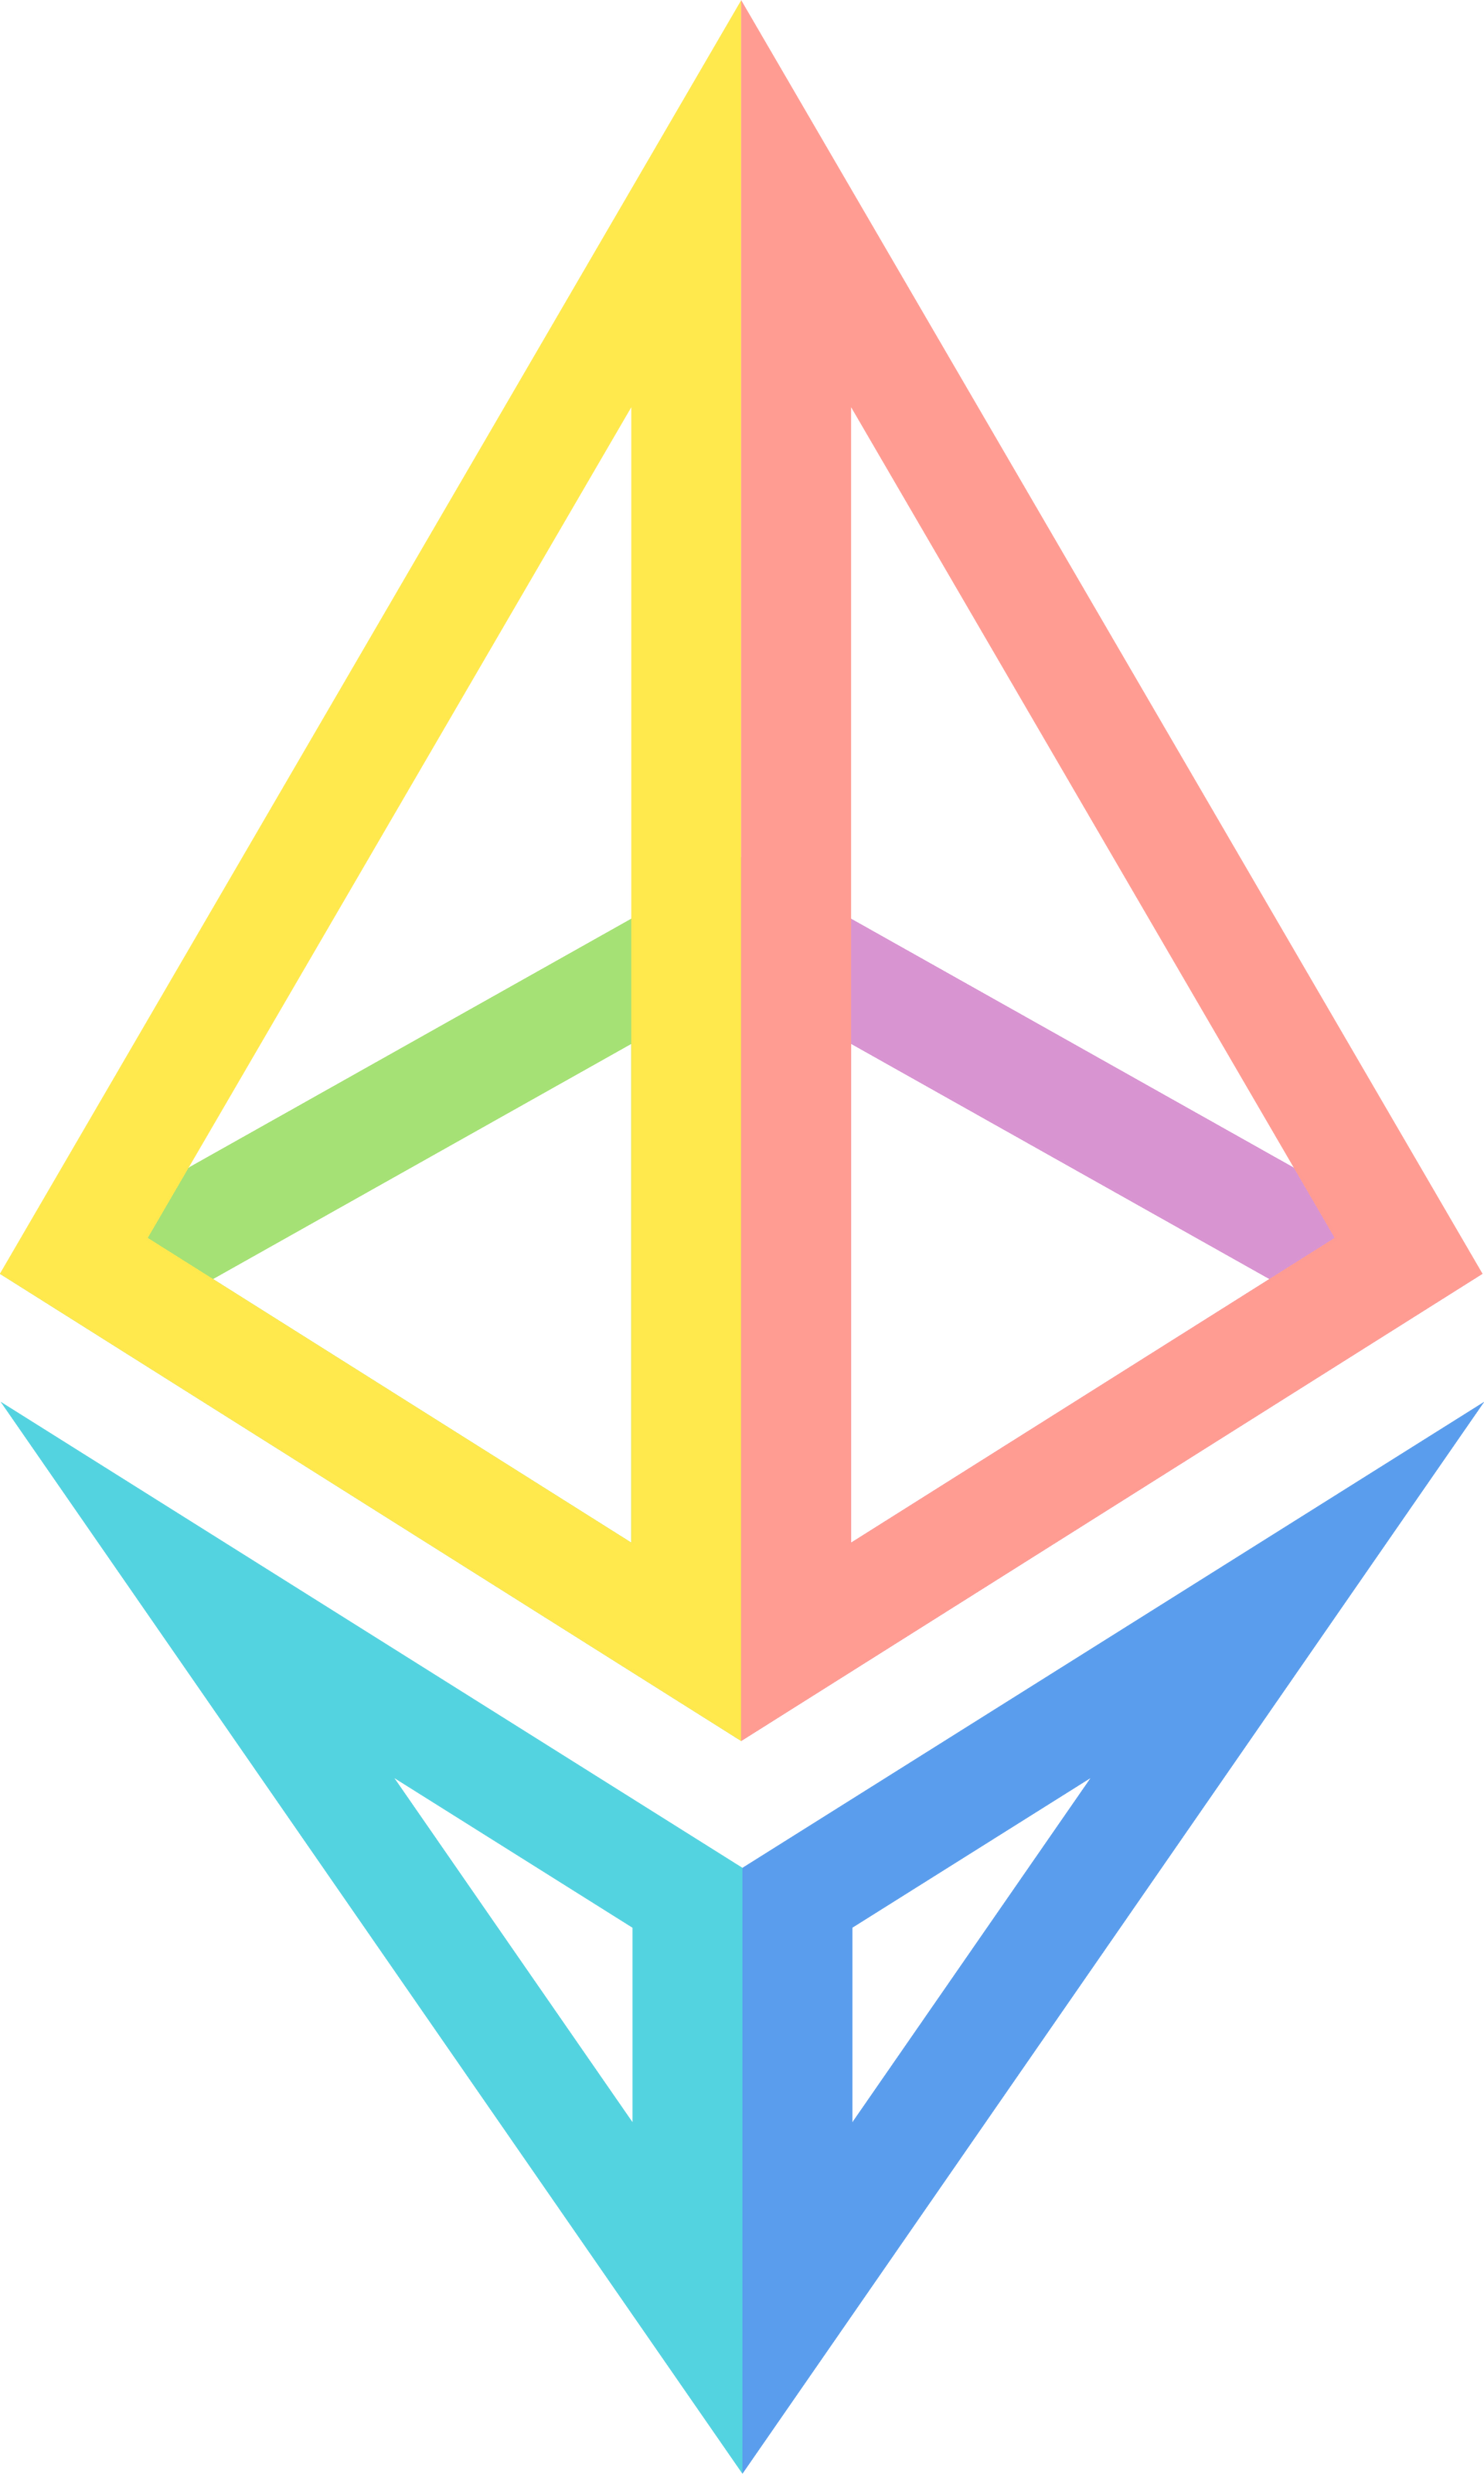 A colorful tilted eth logo!